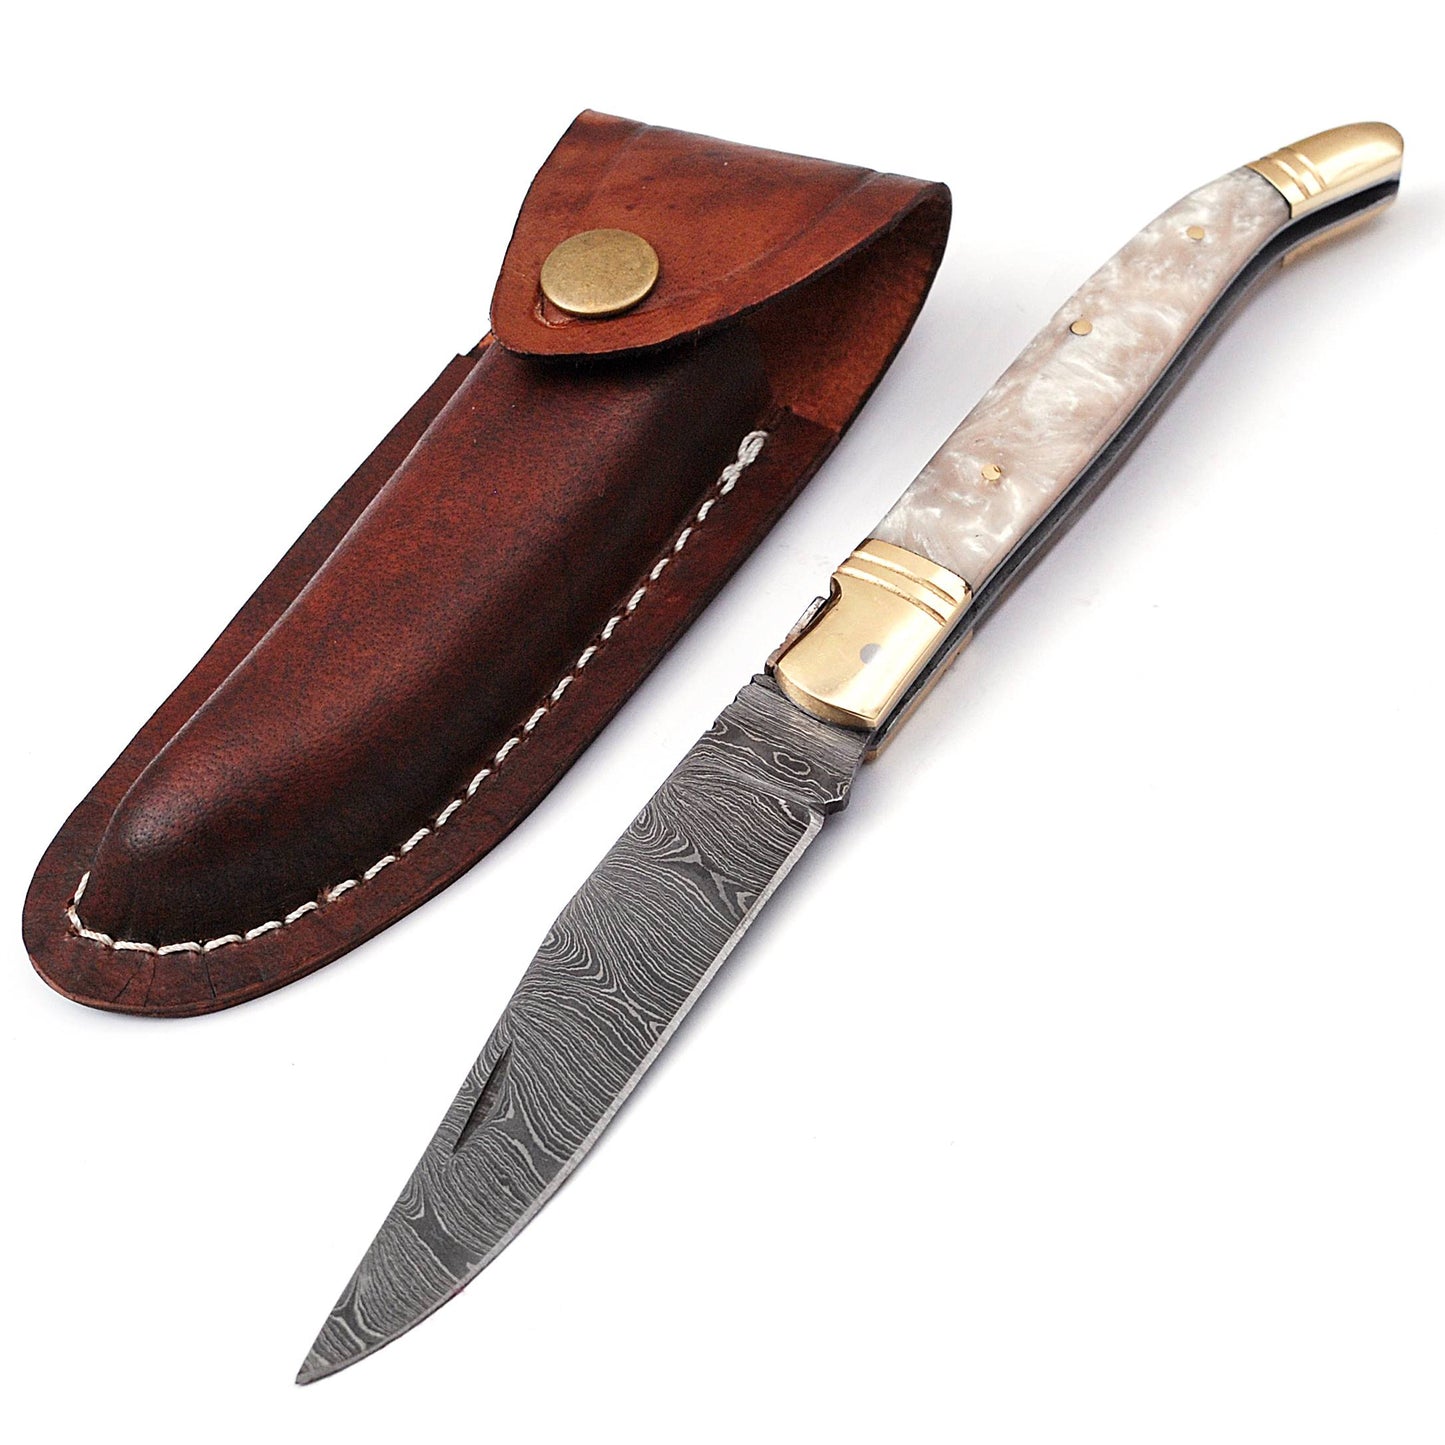 Laguiole Folding Damascus steel knife, 8.5" Long with 4" hand forged custom twist pattern Blade.White color unshrinkable Raisen scale with brass bolster, Cow hide leather sheath included